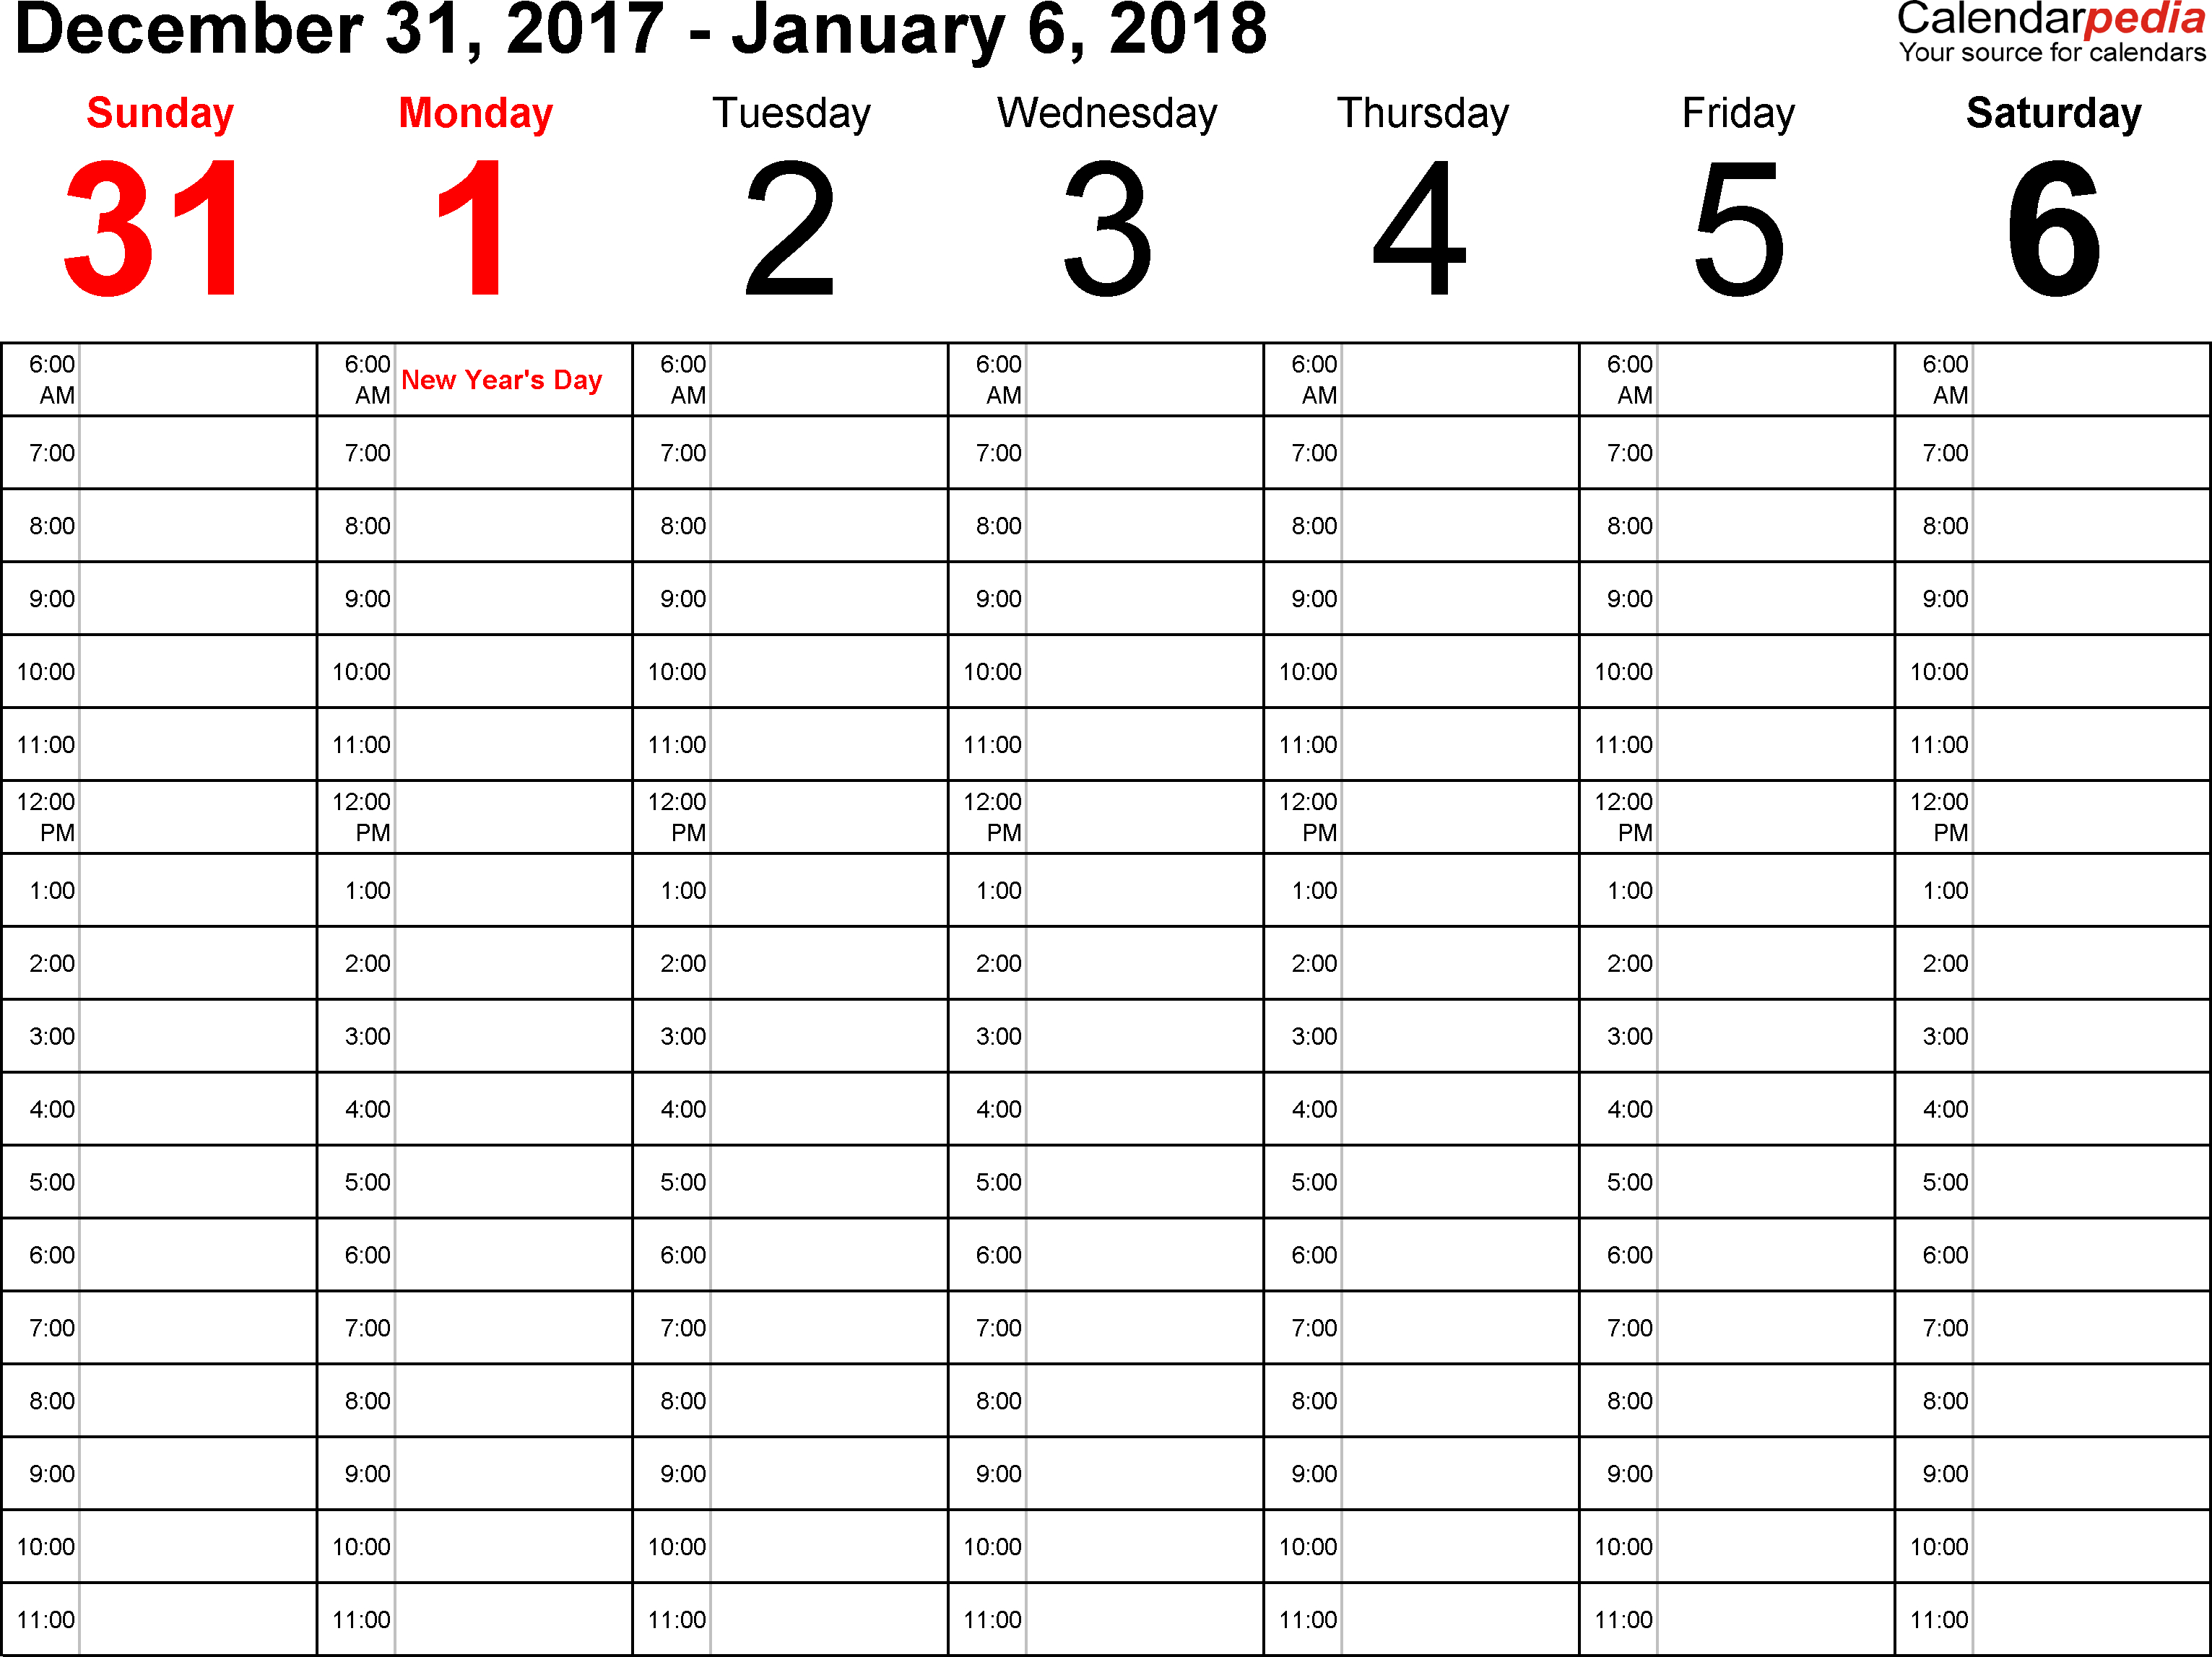 Weekly Calendar 2018 For Word - 12 Free Printable Templates